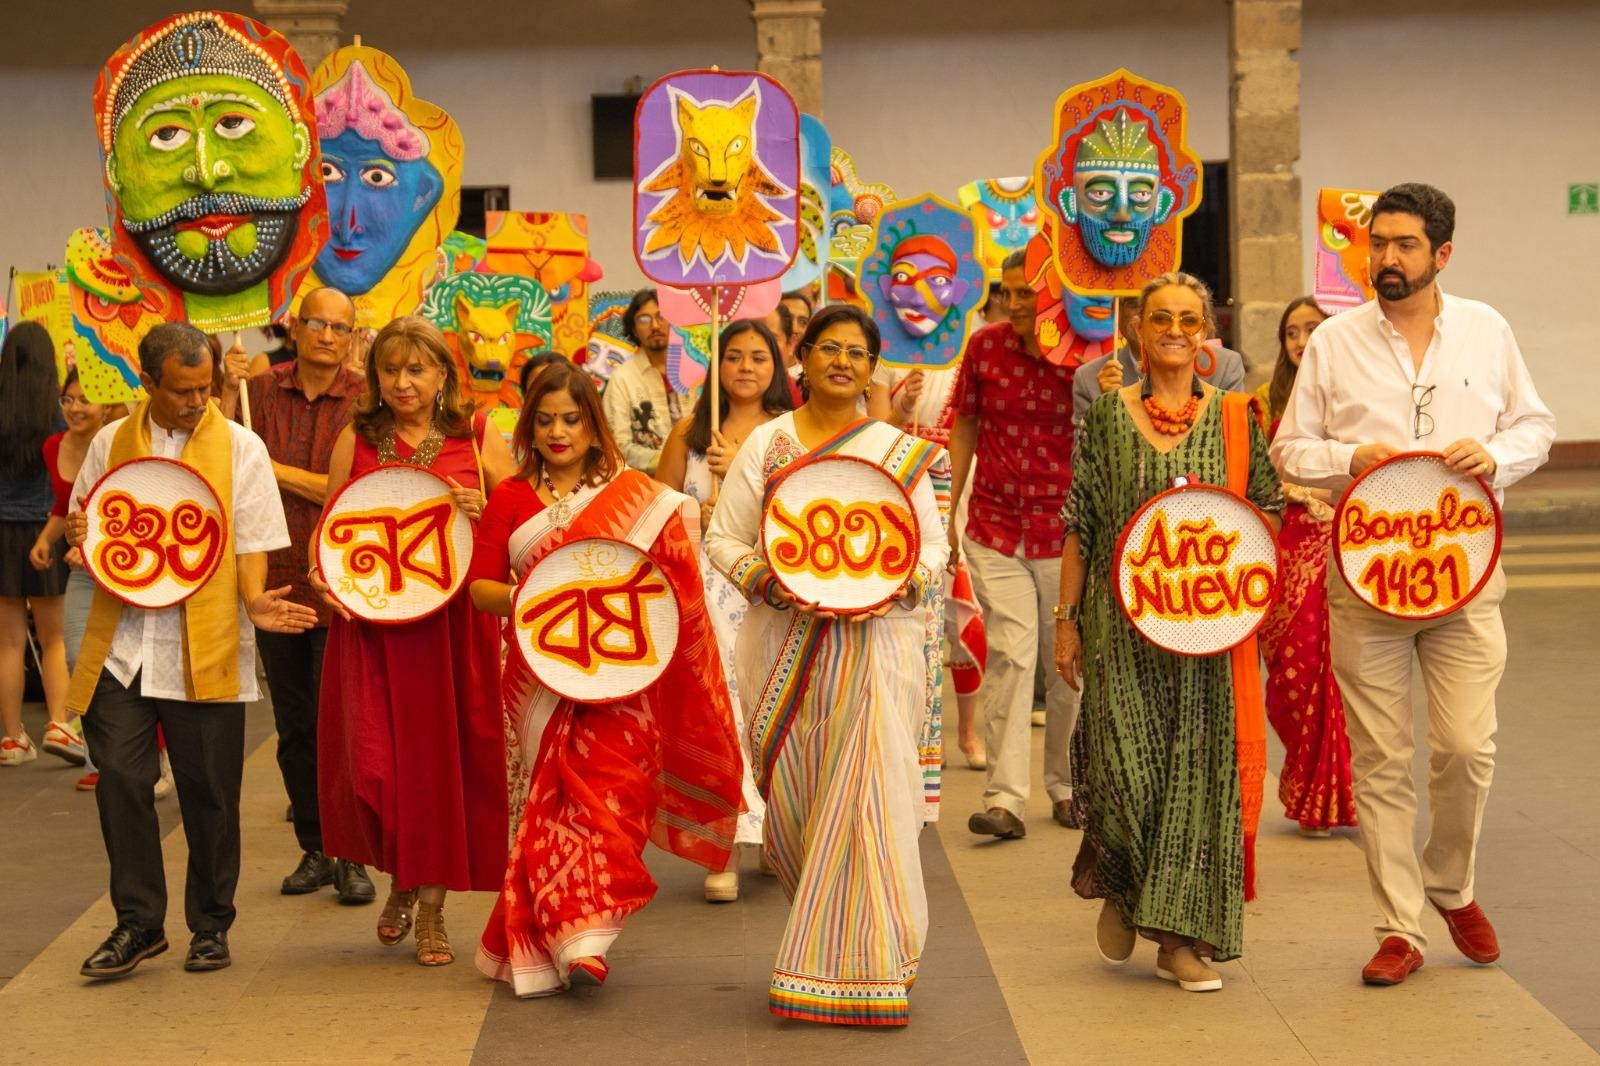 Bengali New Year 1431 celebrated in festive manner in Mexico City